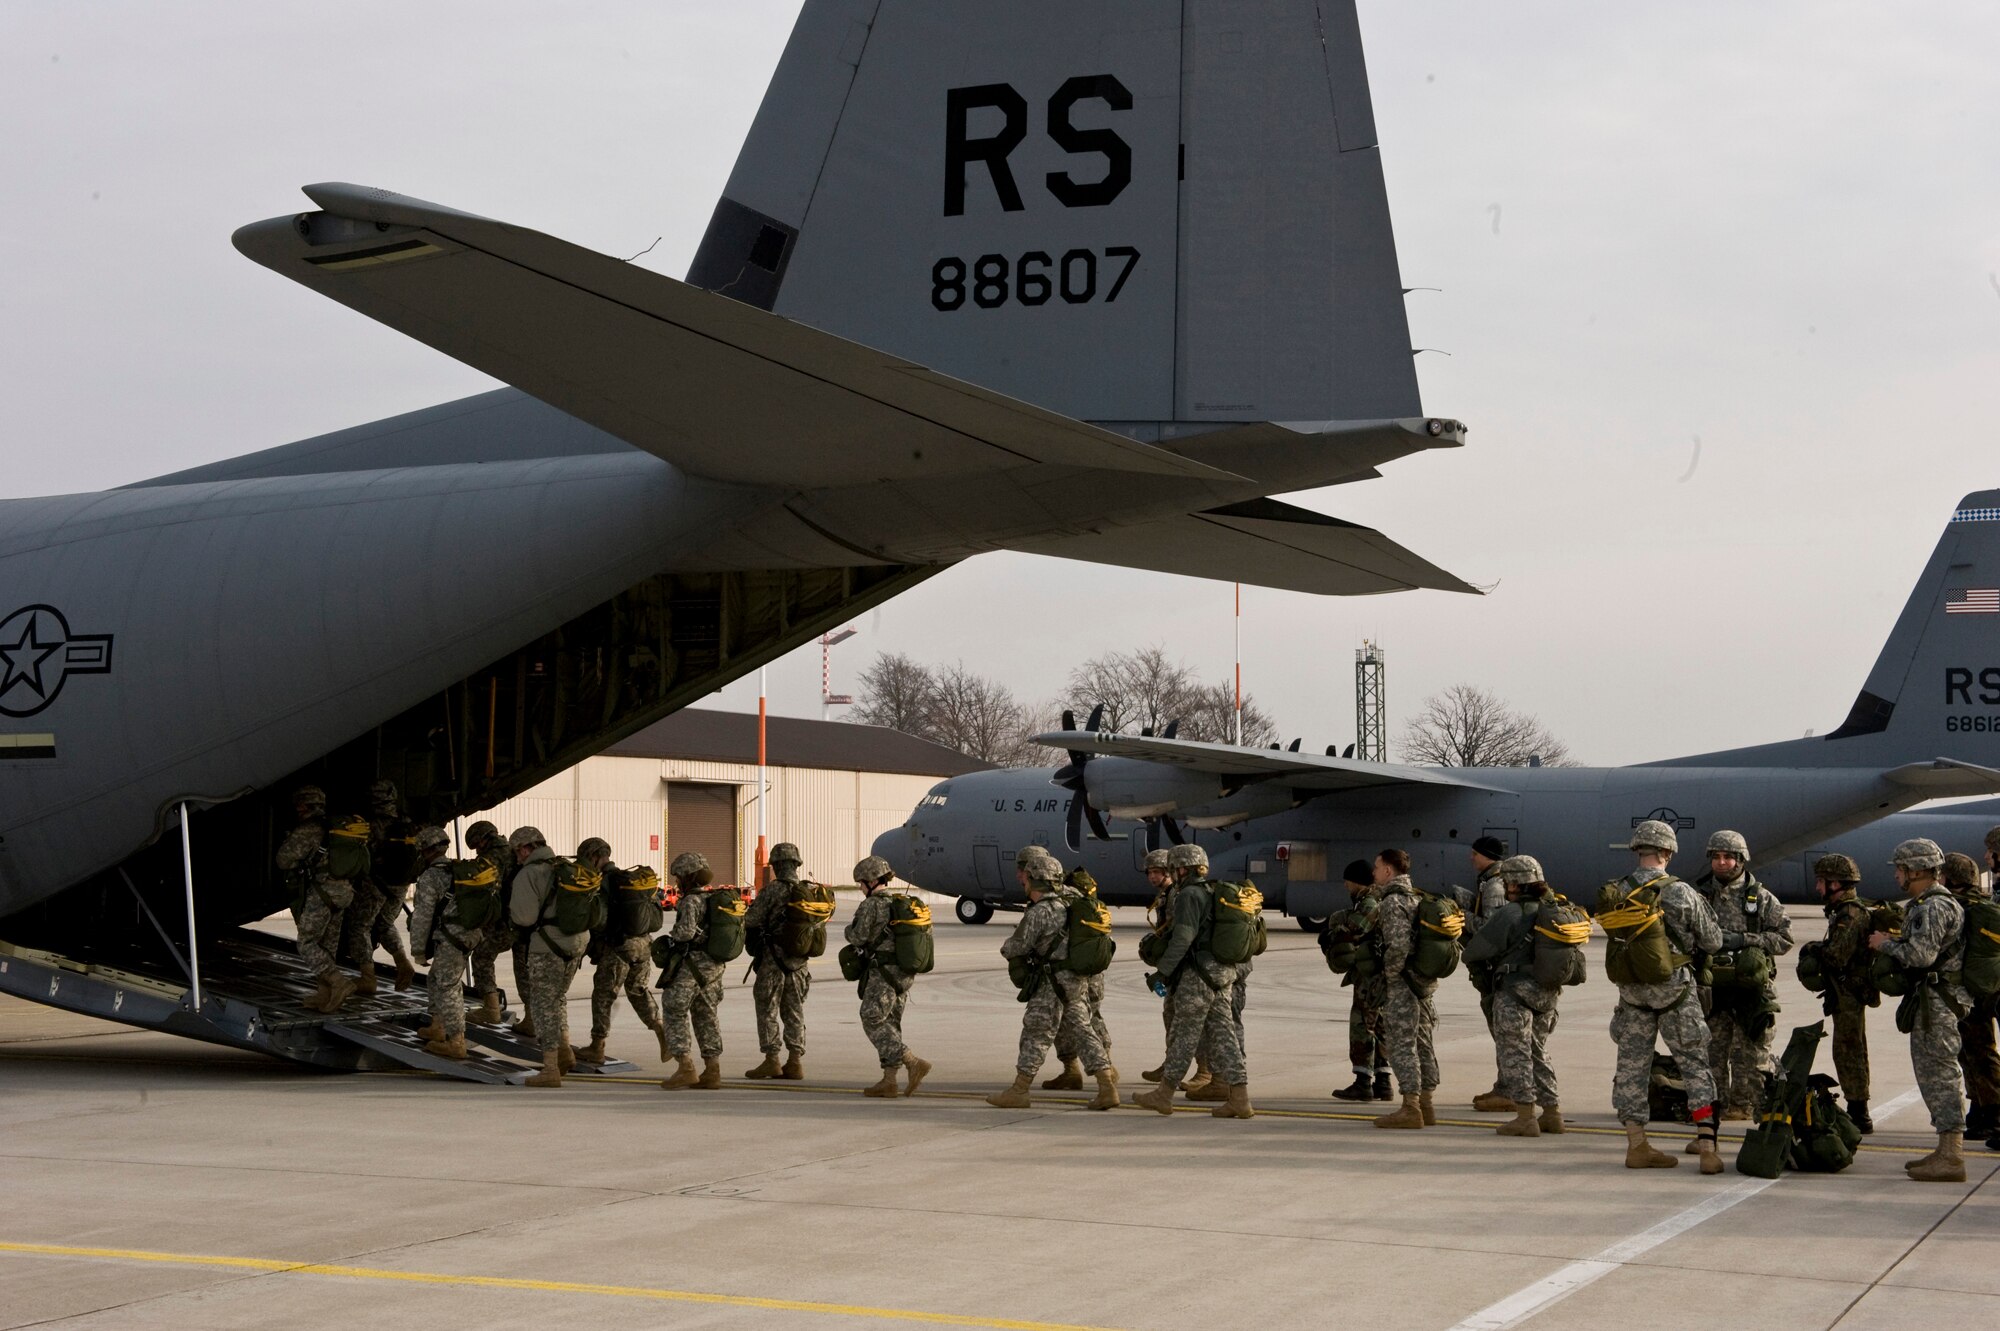 U.S. Army Soldiers, Air Force Airmen and German soldiers load into a C-130J Hercules, from Ramstein Air Base, Germany, in preparation for a training airdrop over drop zone Marnheim, Germany, Feb. 10, 2011. The single C-130J aircraft from the 37th Airlift Squadron, 86th Airlift Wing dropped more than fifty service members at the drop site.  (U.S. Air Force photo/TSgt Wayne Clark, AFNE Regional News Bureau) (Released)